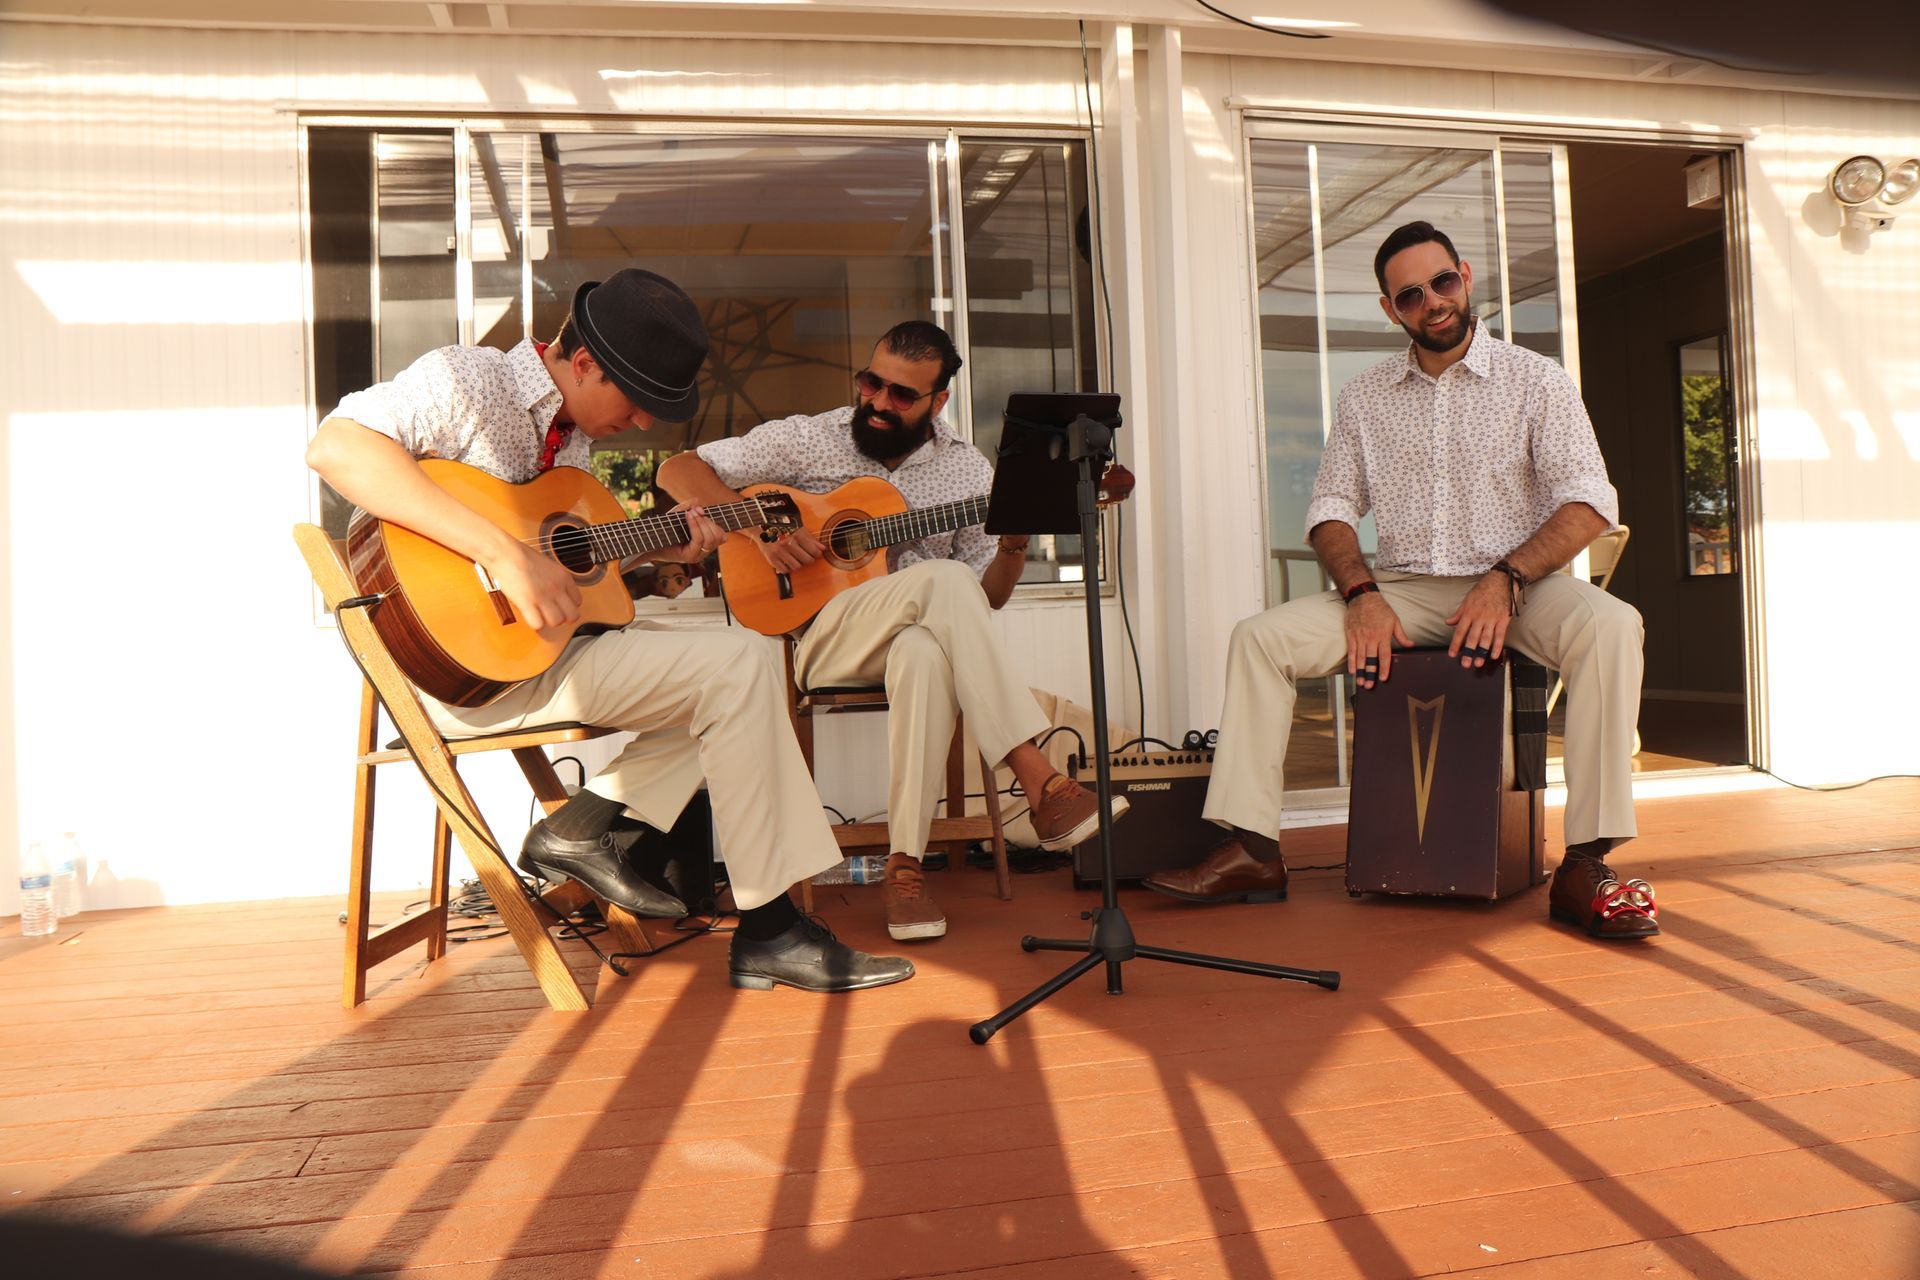 Latin trio performing at first outdoor private event